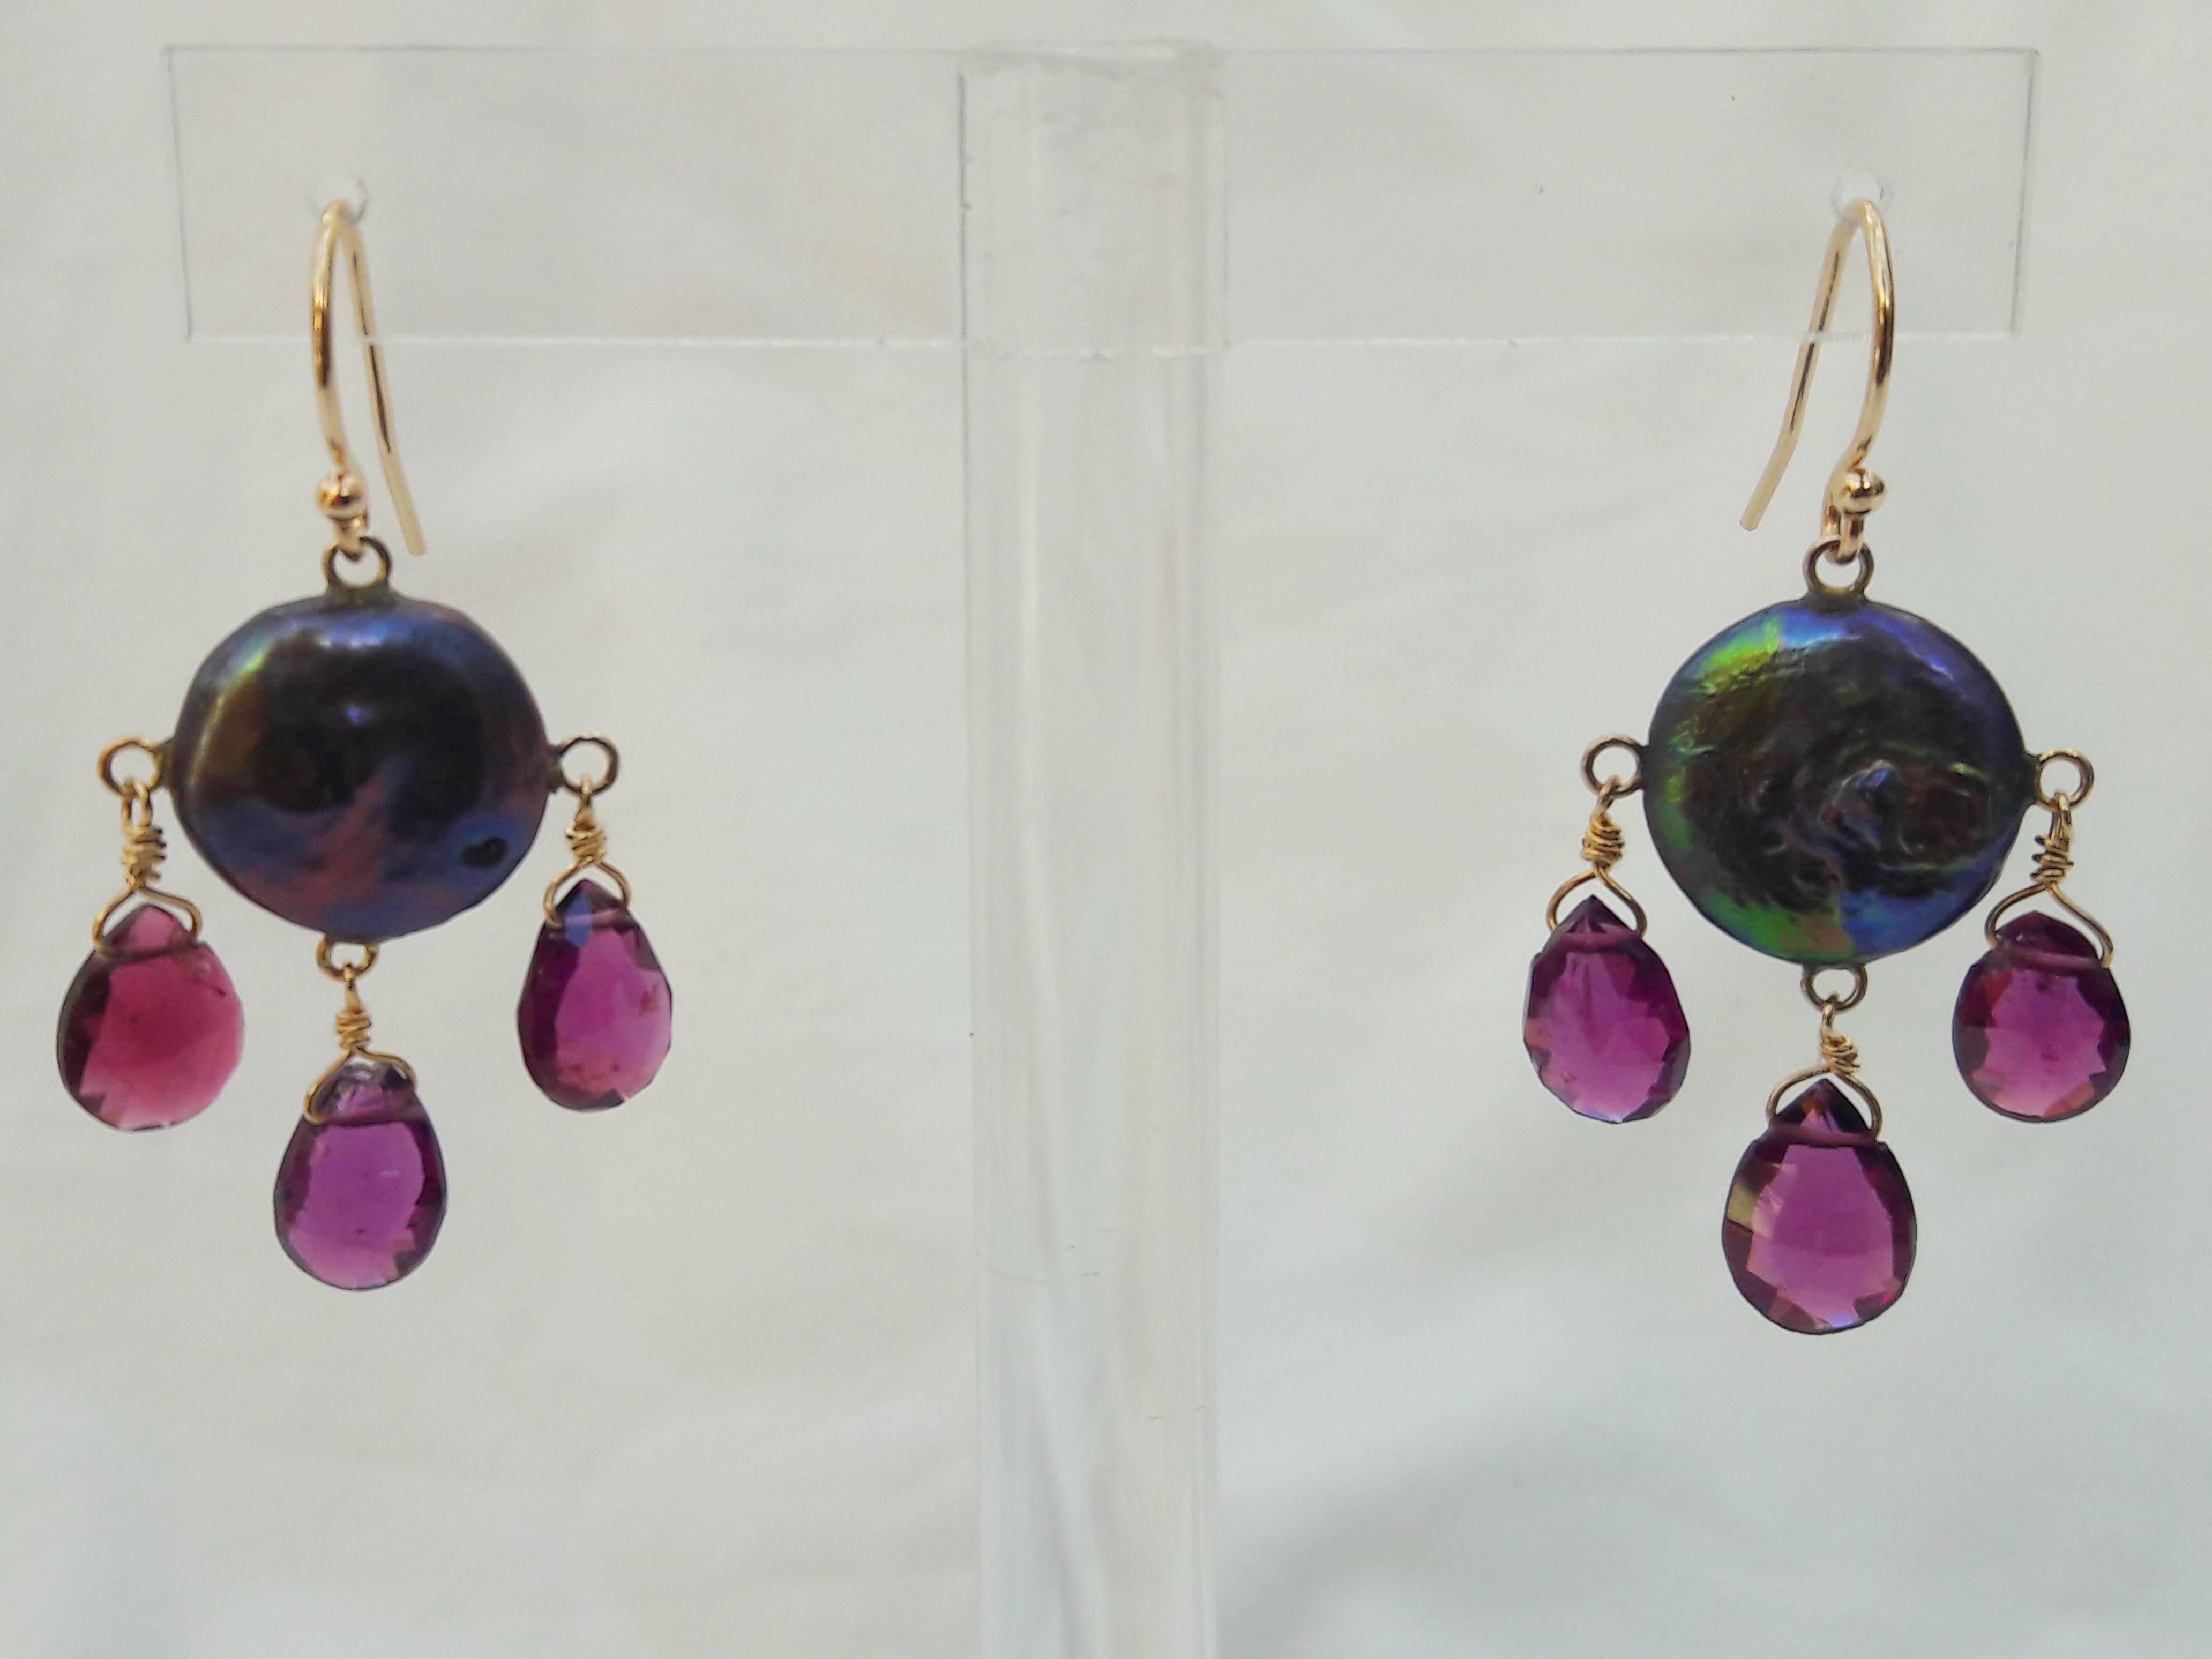 Bead Marina J Black Pearl and Pink Tourmaline Earrings with 14k Yellow Gold Hook